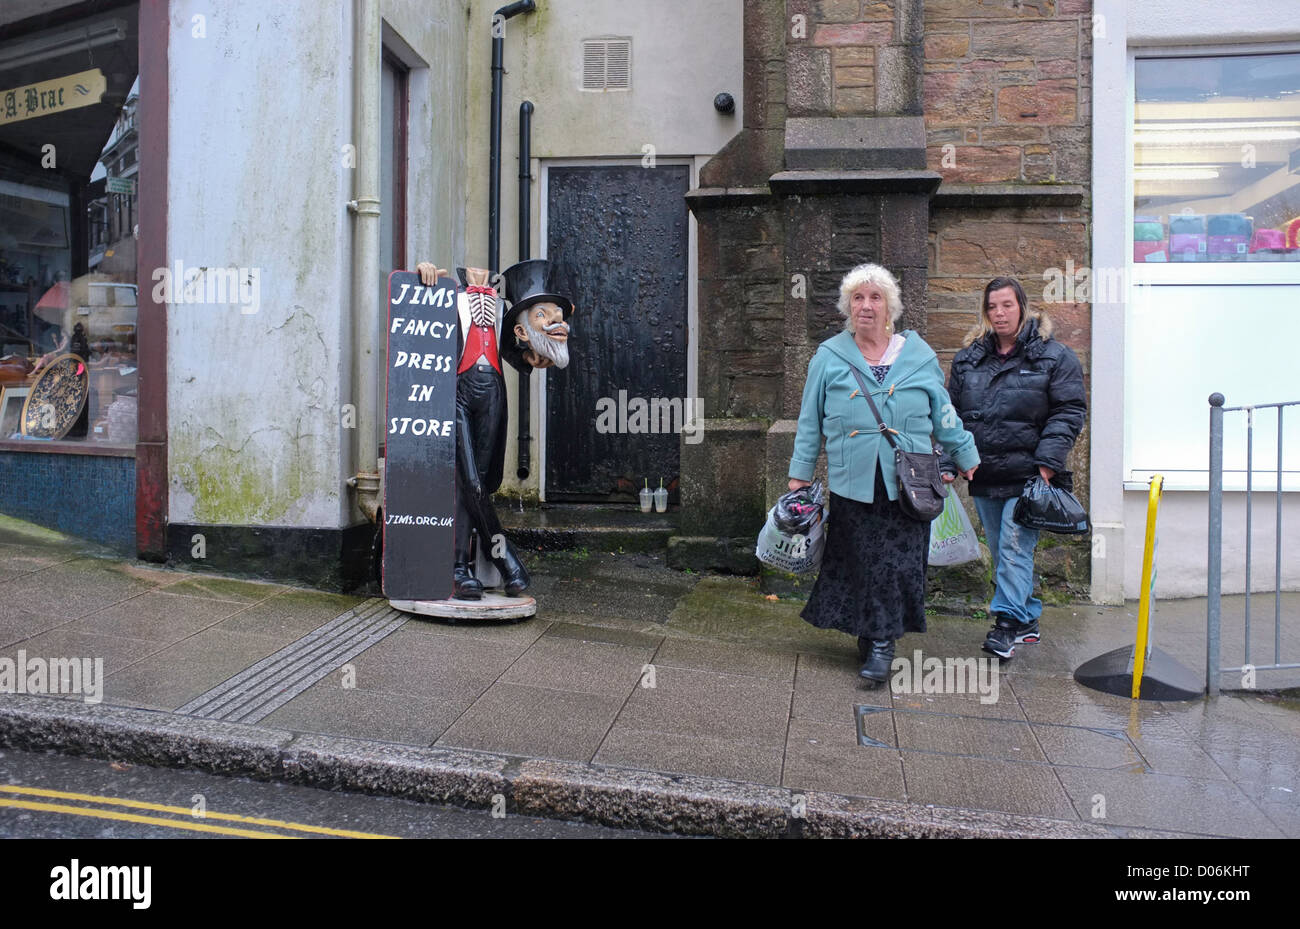 Two women walks past a sign for a fancy dress shop in Redruth, Cornwall Stock Photo